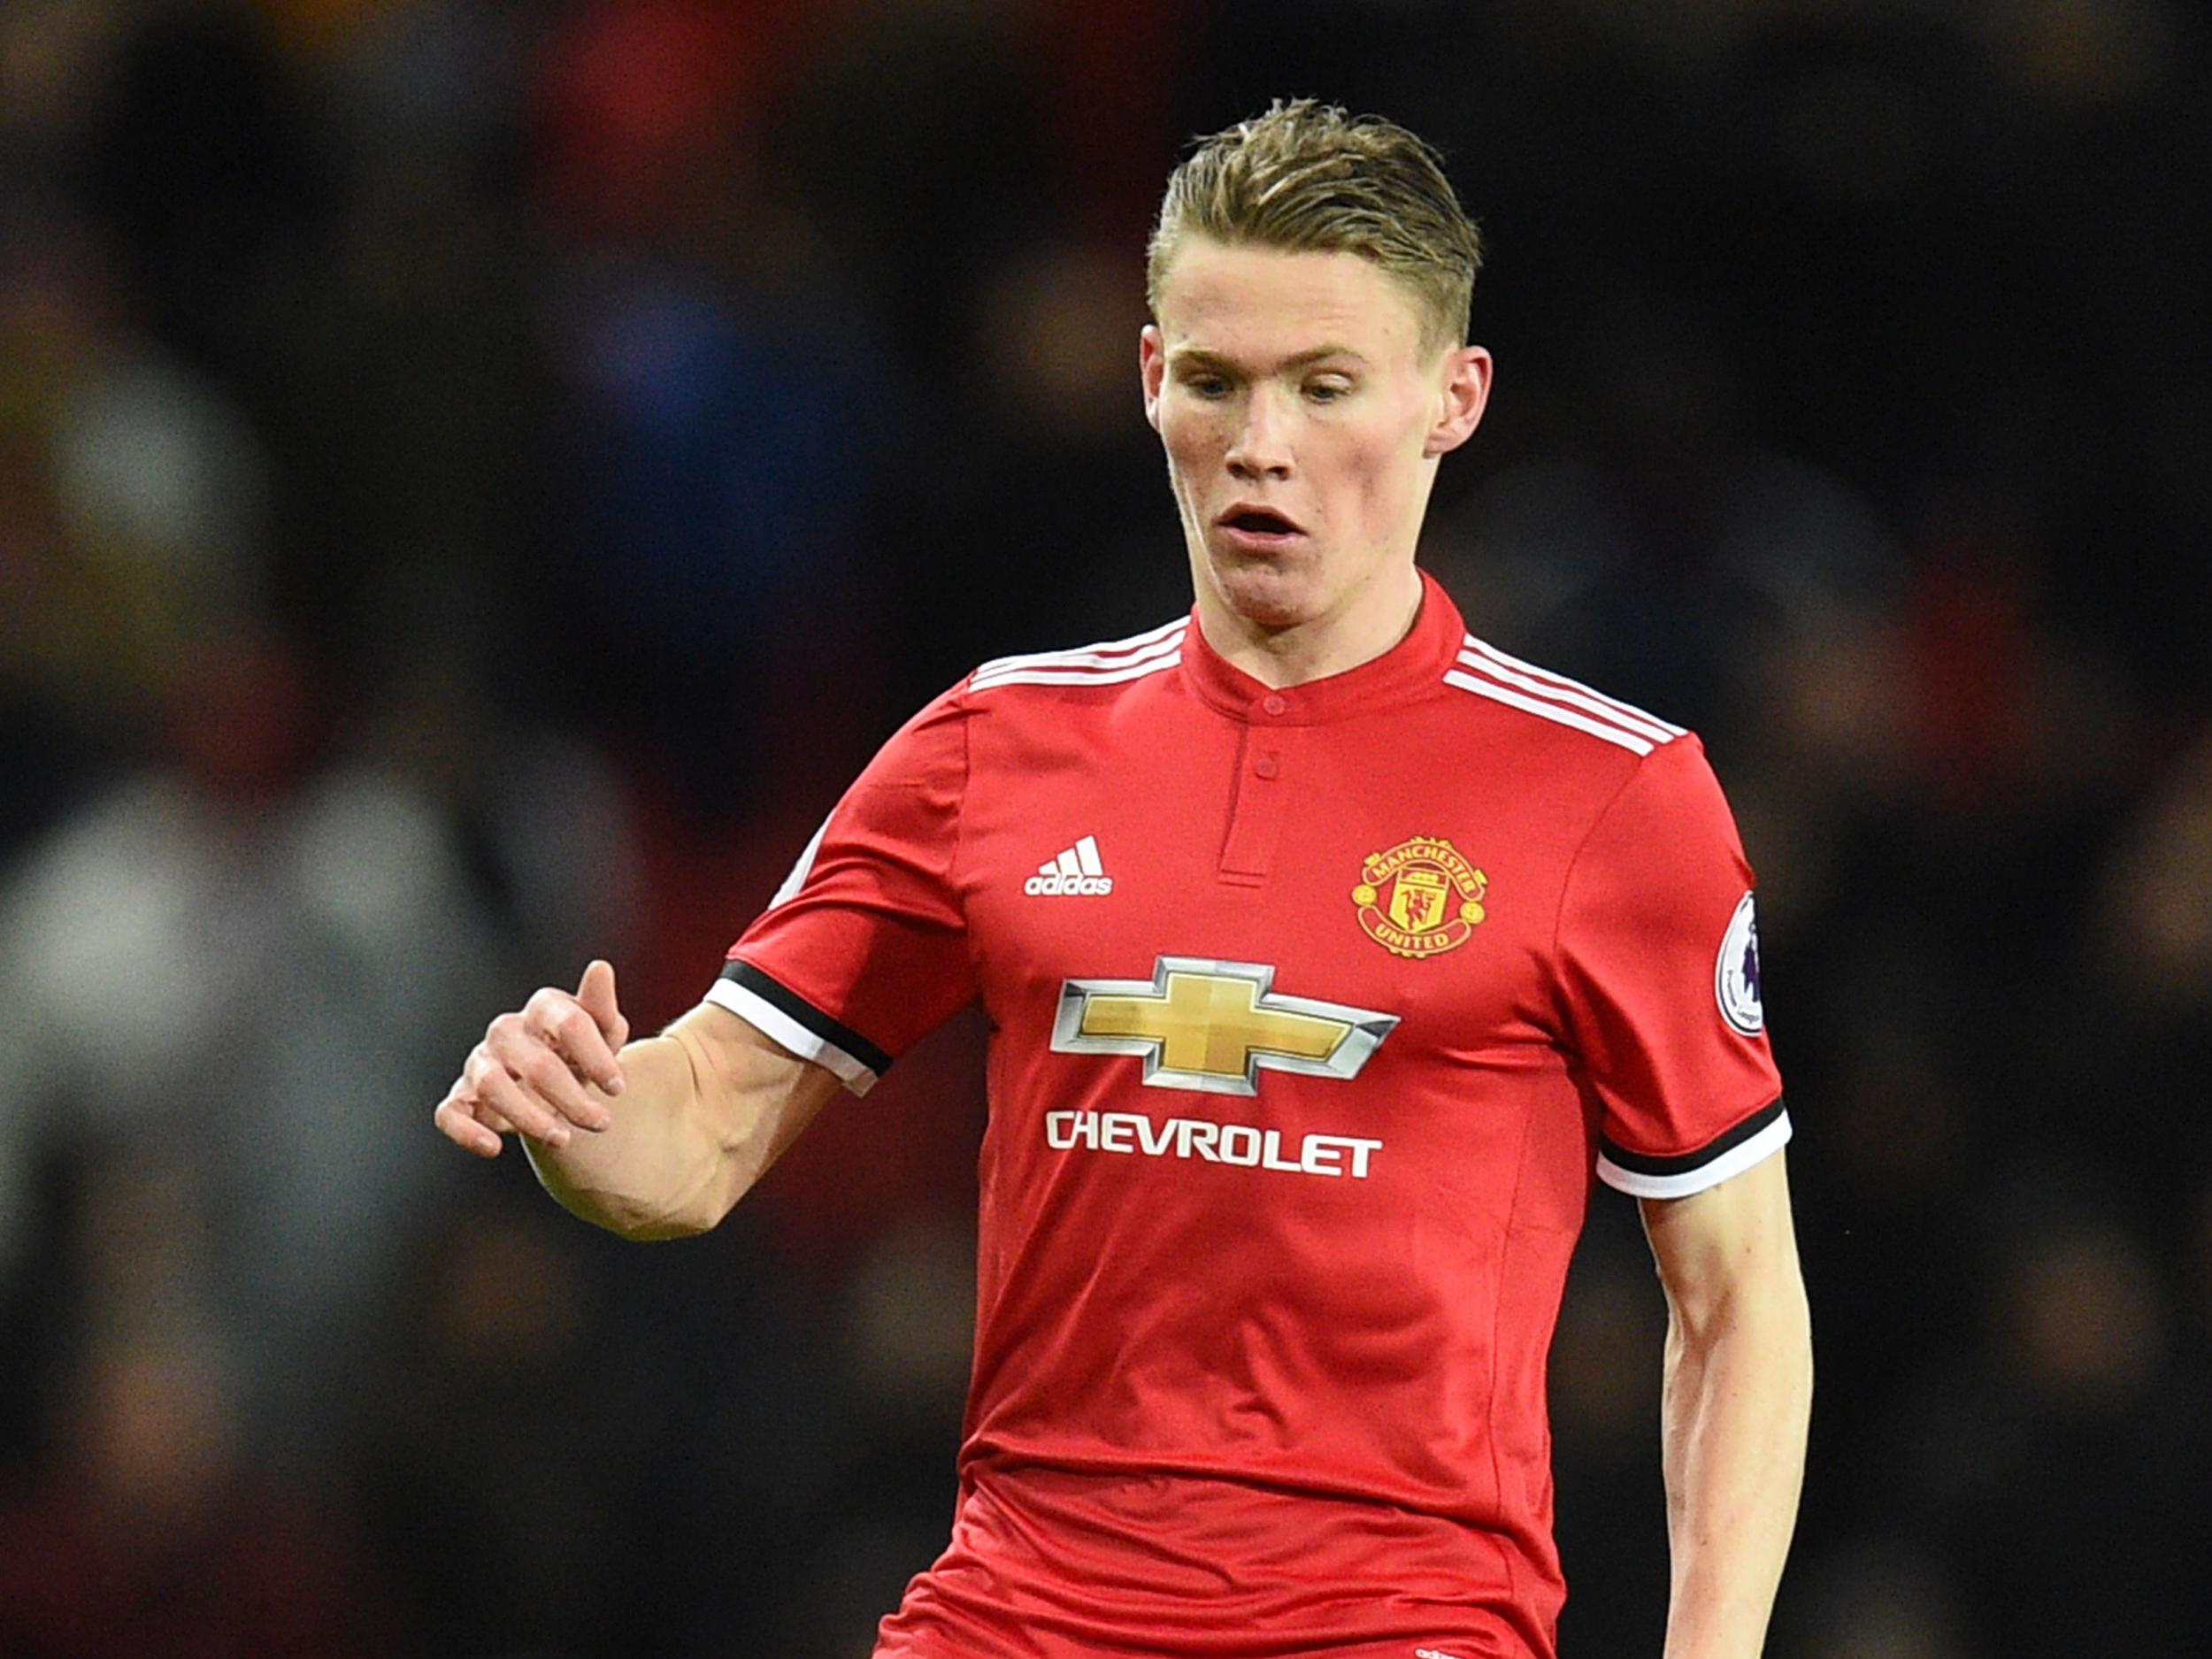 Scott McTominay has established himself in Jose Mourinho's first team